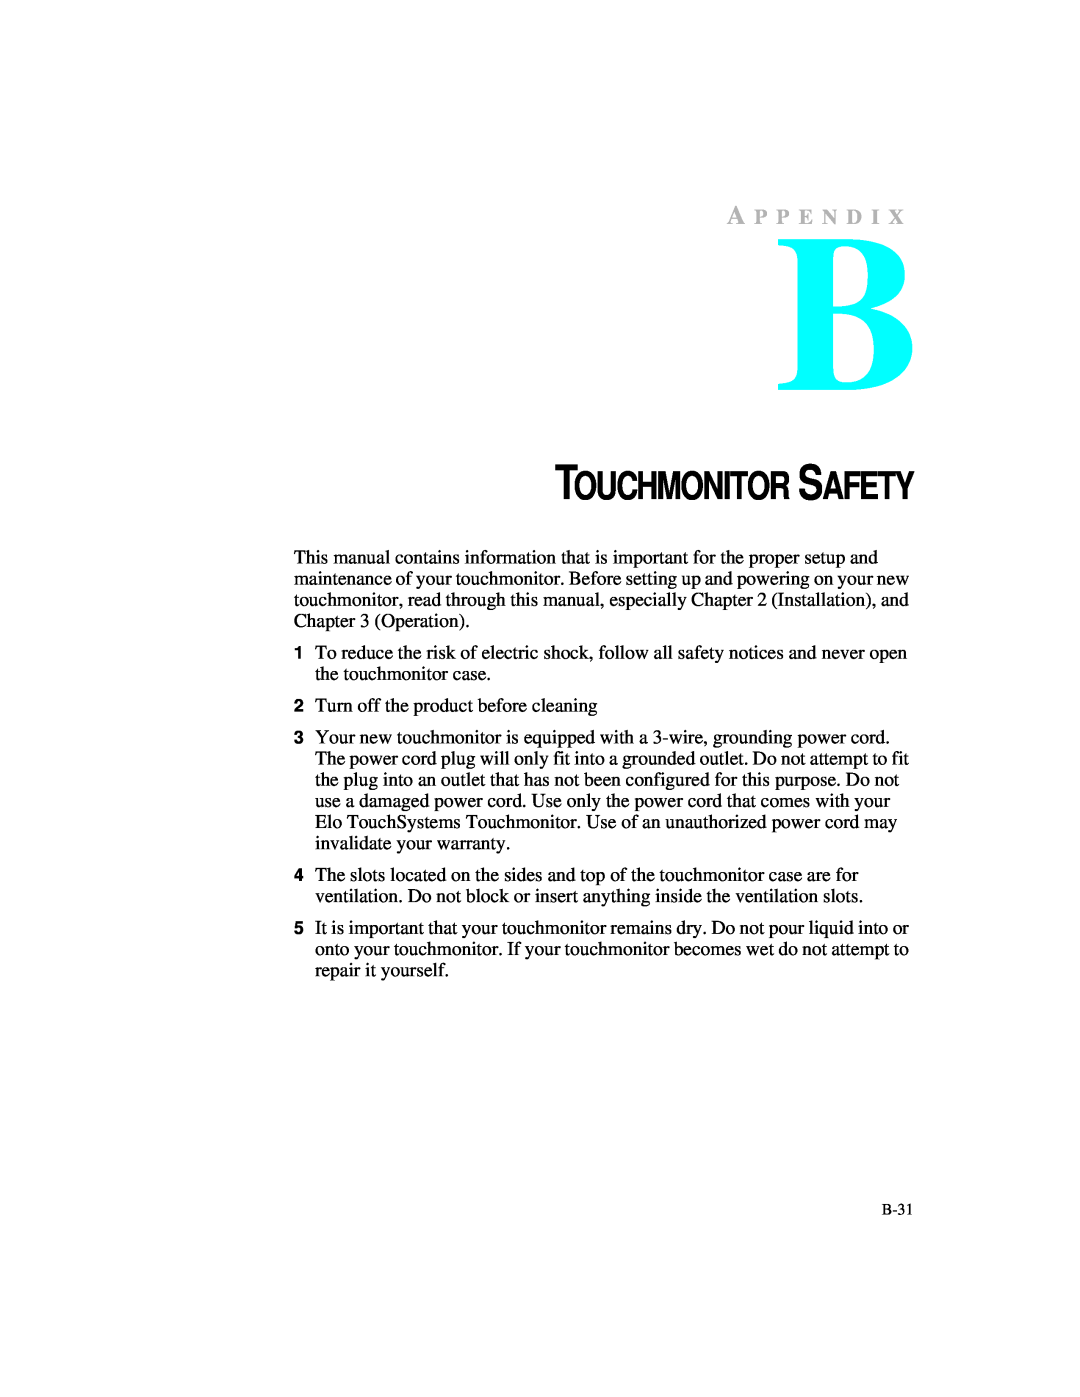 Elo TouchSystems 1925L manual Touchmonitor Safety, A P P E N D I 